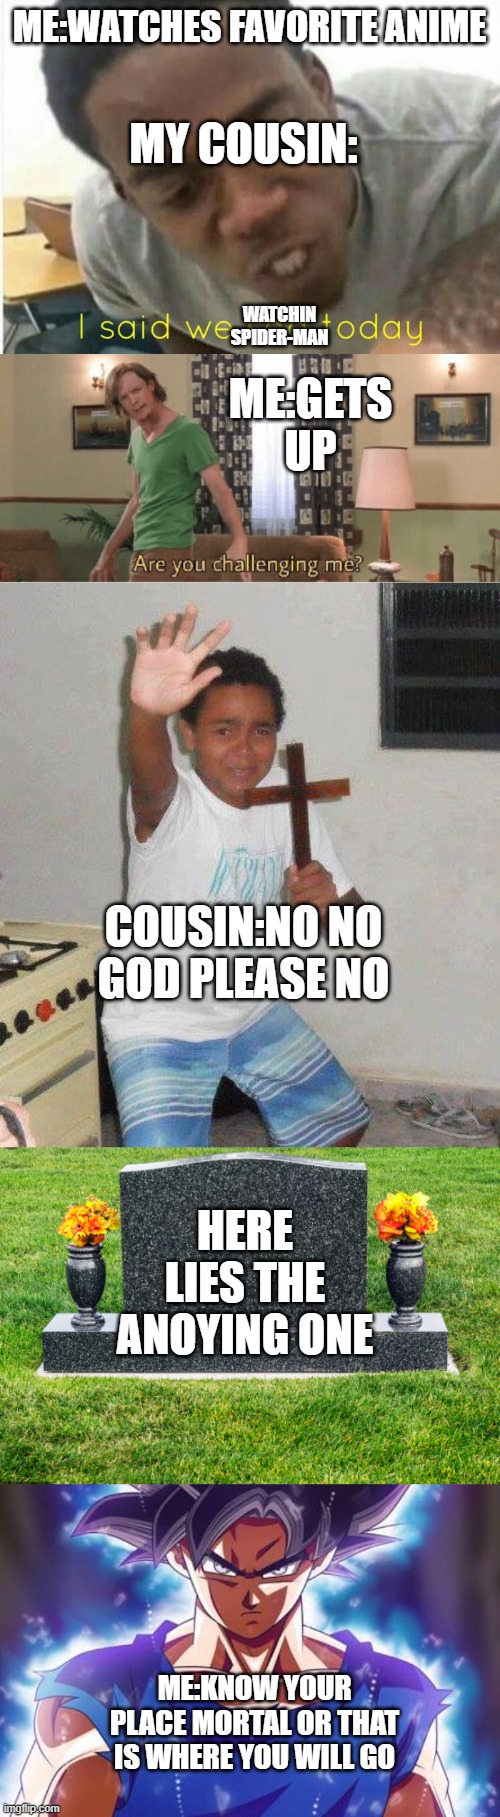 Why this be true tho | MY COUSIN:; ME:WATCHES FAVORITE ANIME; WATCHIN SPIDER-MAN; ME:GETS UP; COUSIN:NO NO GOD PLEASE NO; HERE LIES THE ANOYING ONE; ME:KNOW YOUR PLACE MORTAL OR THAT IS WHERE YOU WILL GO | image tagged in i said we ____ today,are you challenging me,kid with cross,tombstone,goku ultra instinct | made w/ Imgflip meme maker